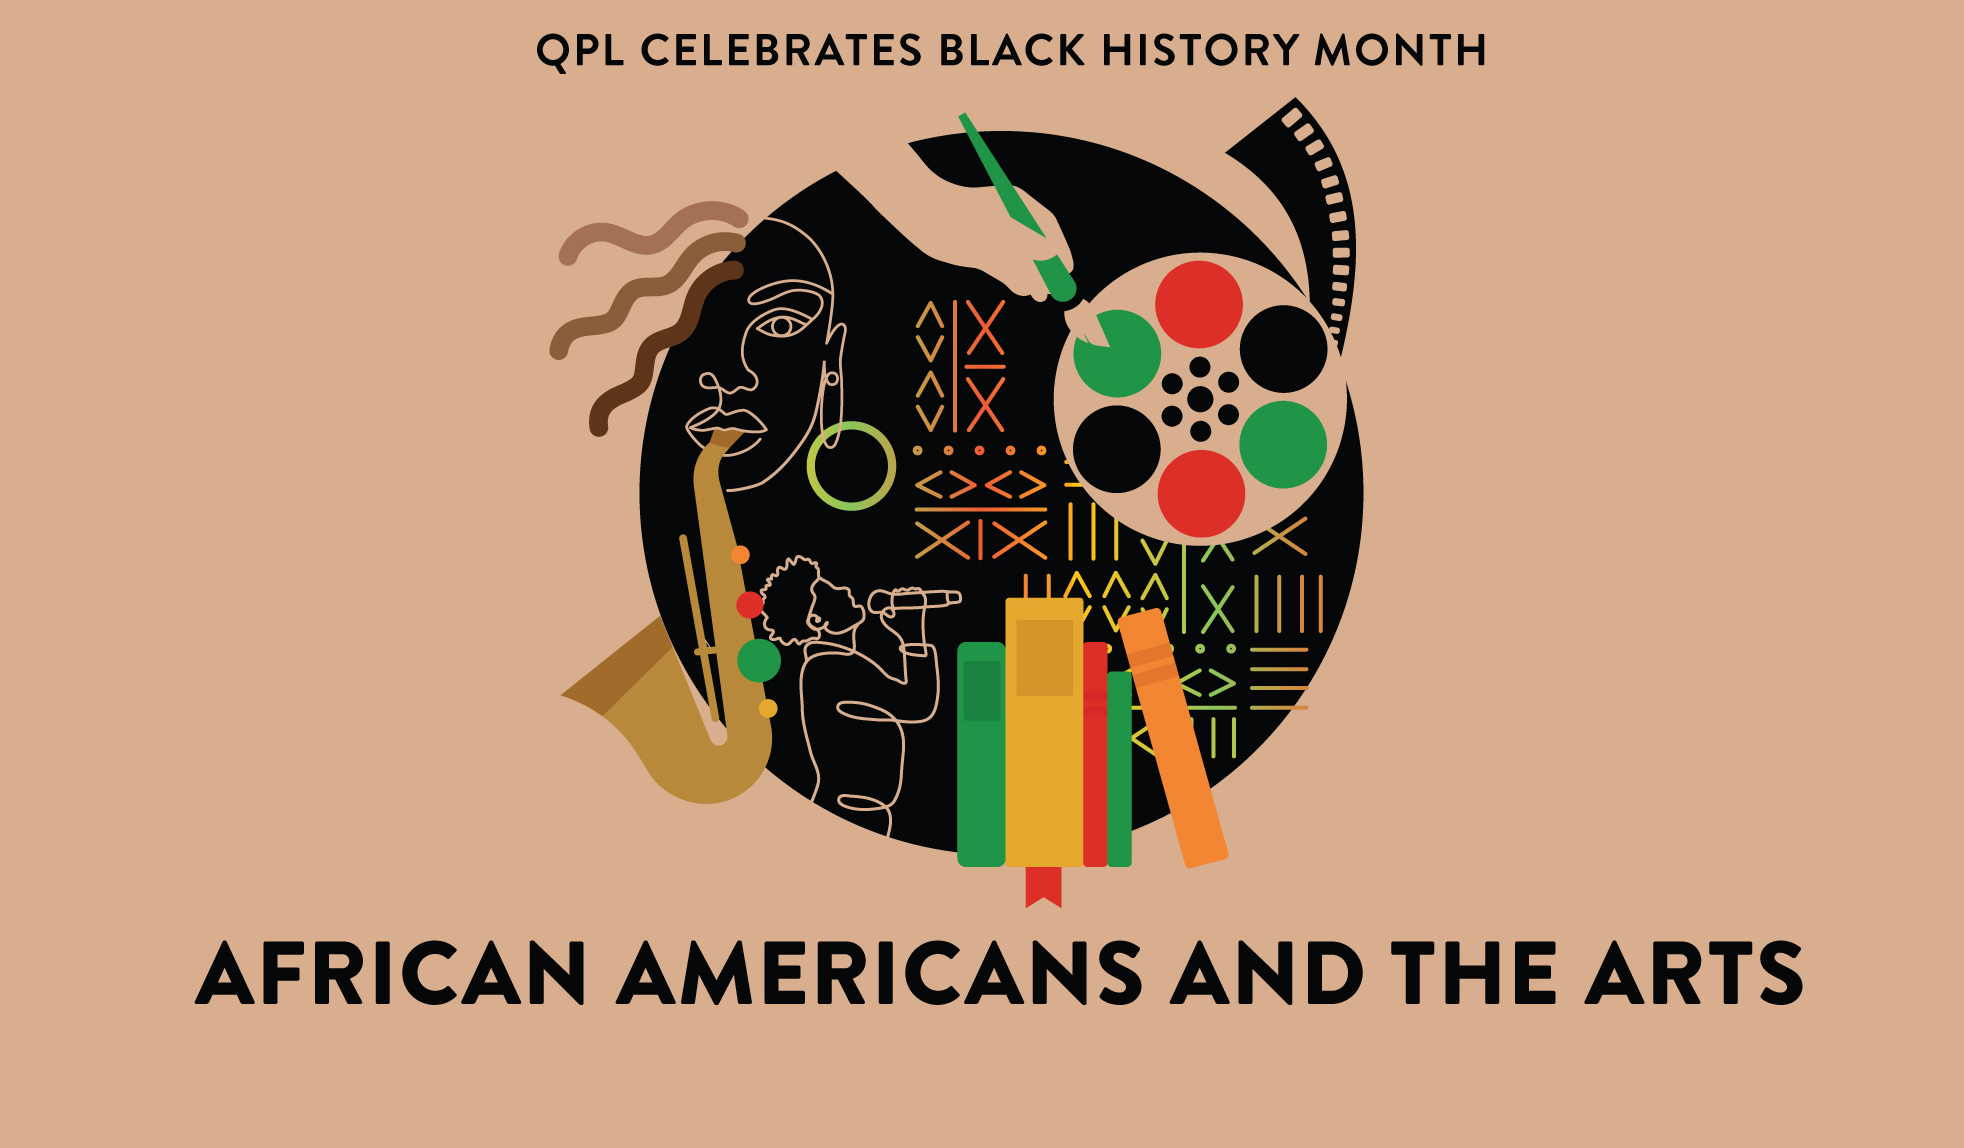 This Black History Month, join us as we celebrate African Americans and the Arts!